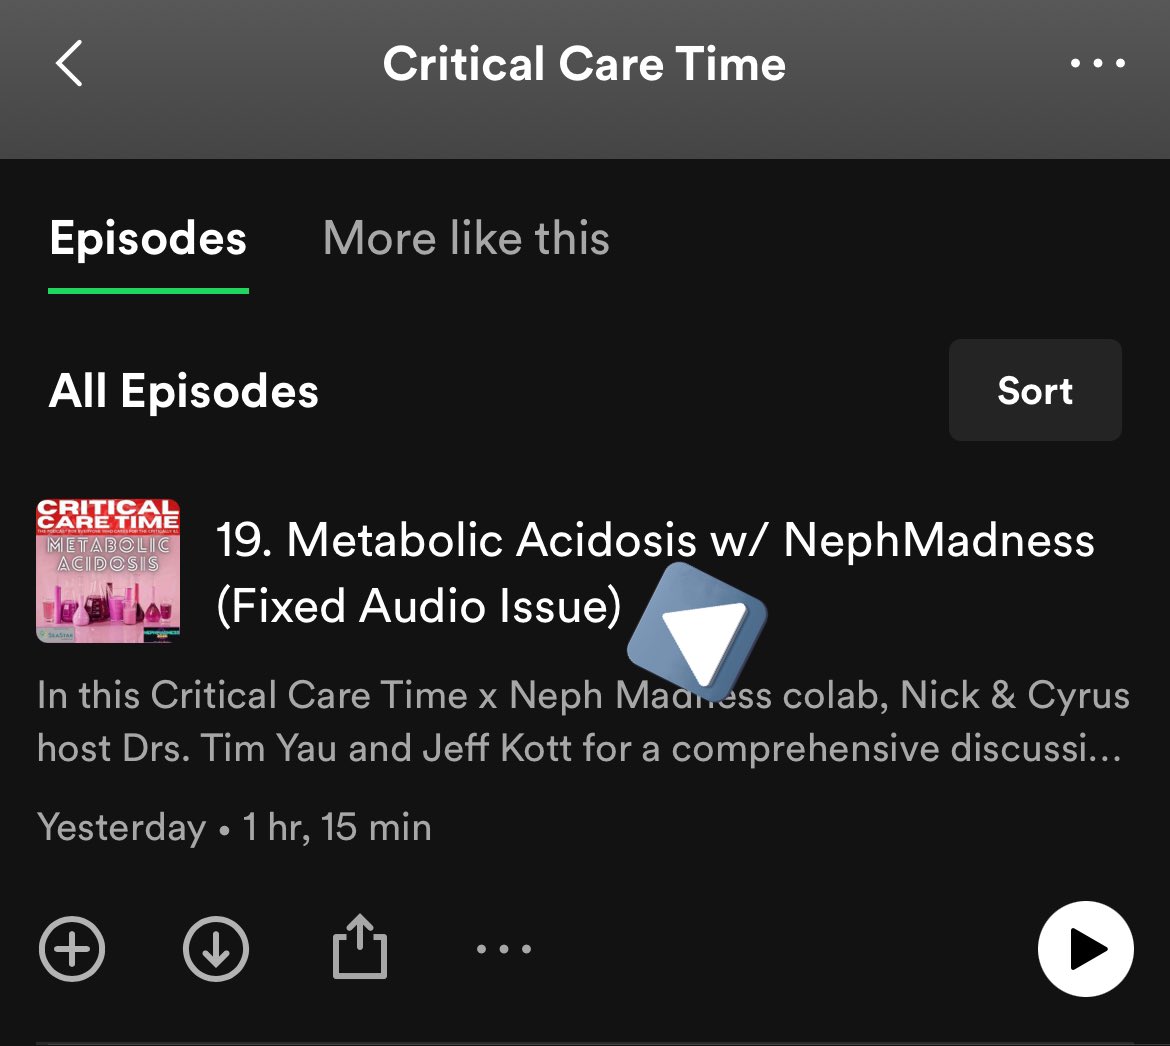 Folks - We’ve fixed that weird annoying background sound in our latest episode. So sorry about that! Be sure to listen to the version called “fixed audio issue” in your favorite podcast app. And now back to #NephMadness!